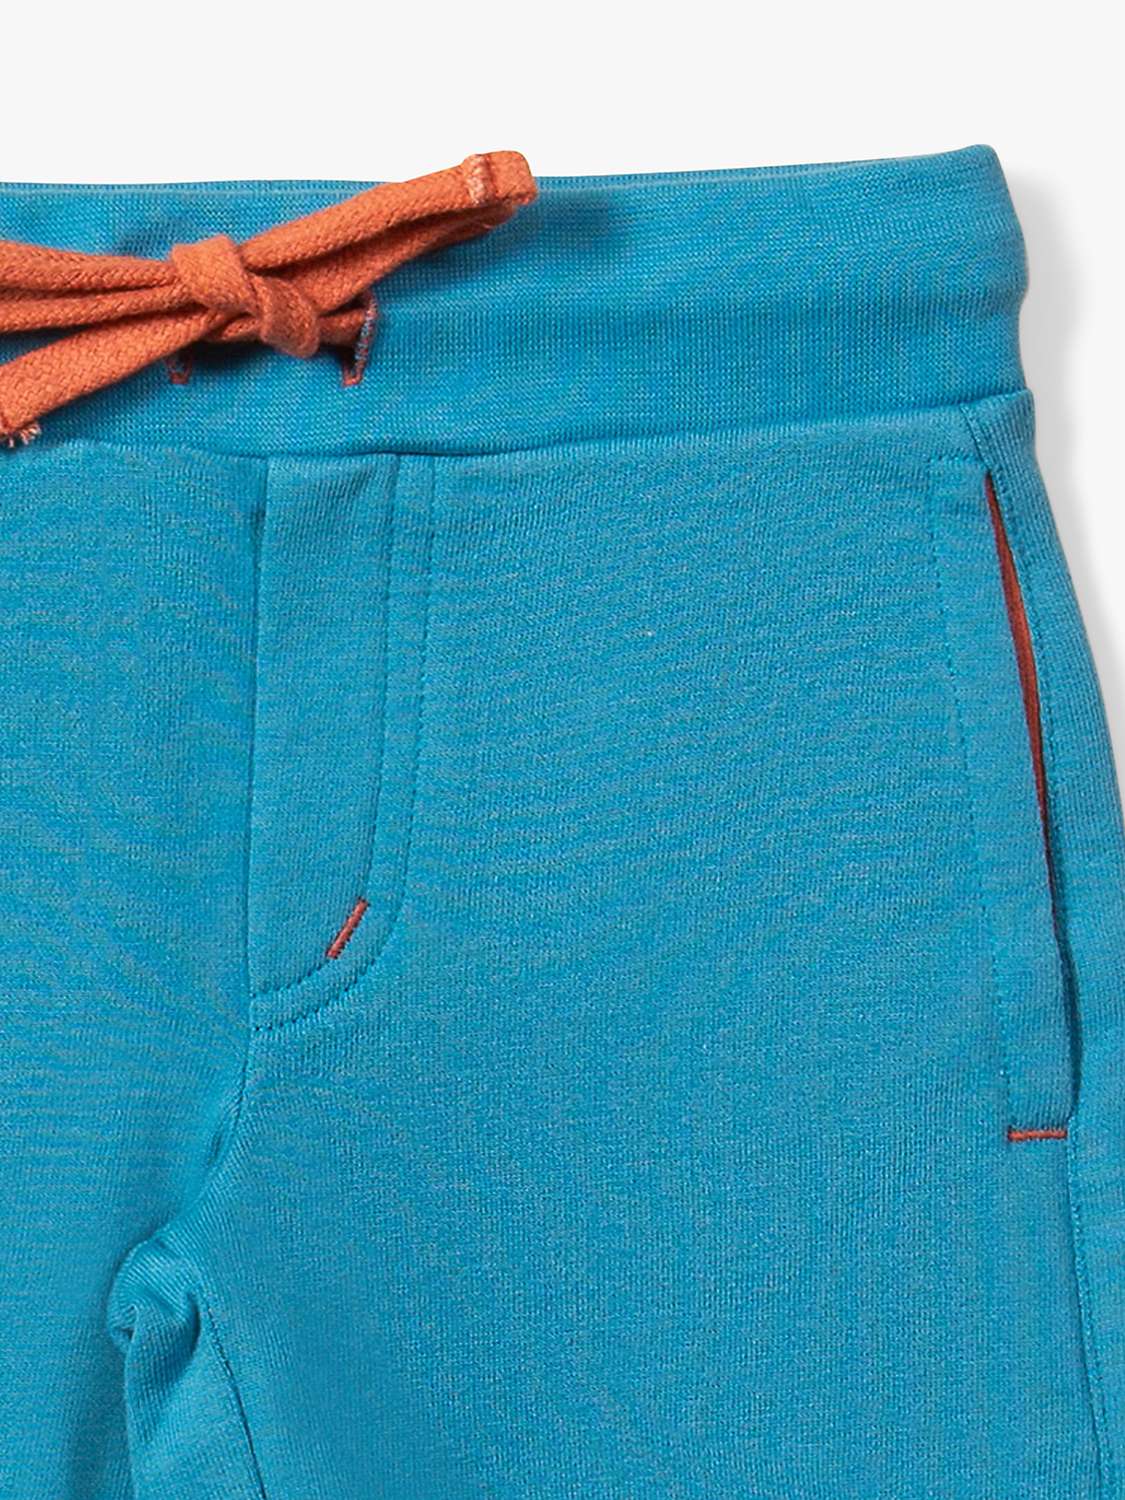 Buy Little Green Radicals Baby Organic Cotton Comfy Jogger Shorts, Blue Marl Online at johnlewis.com